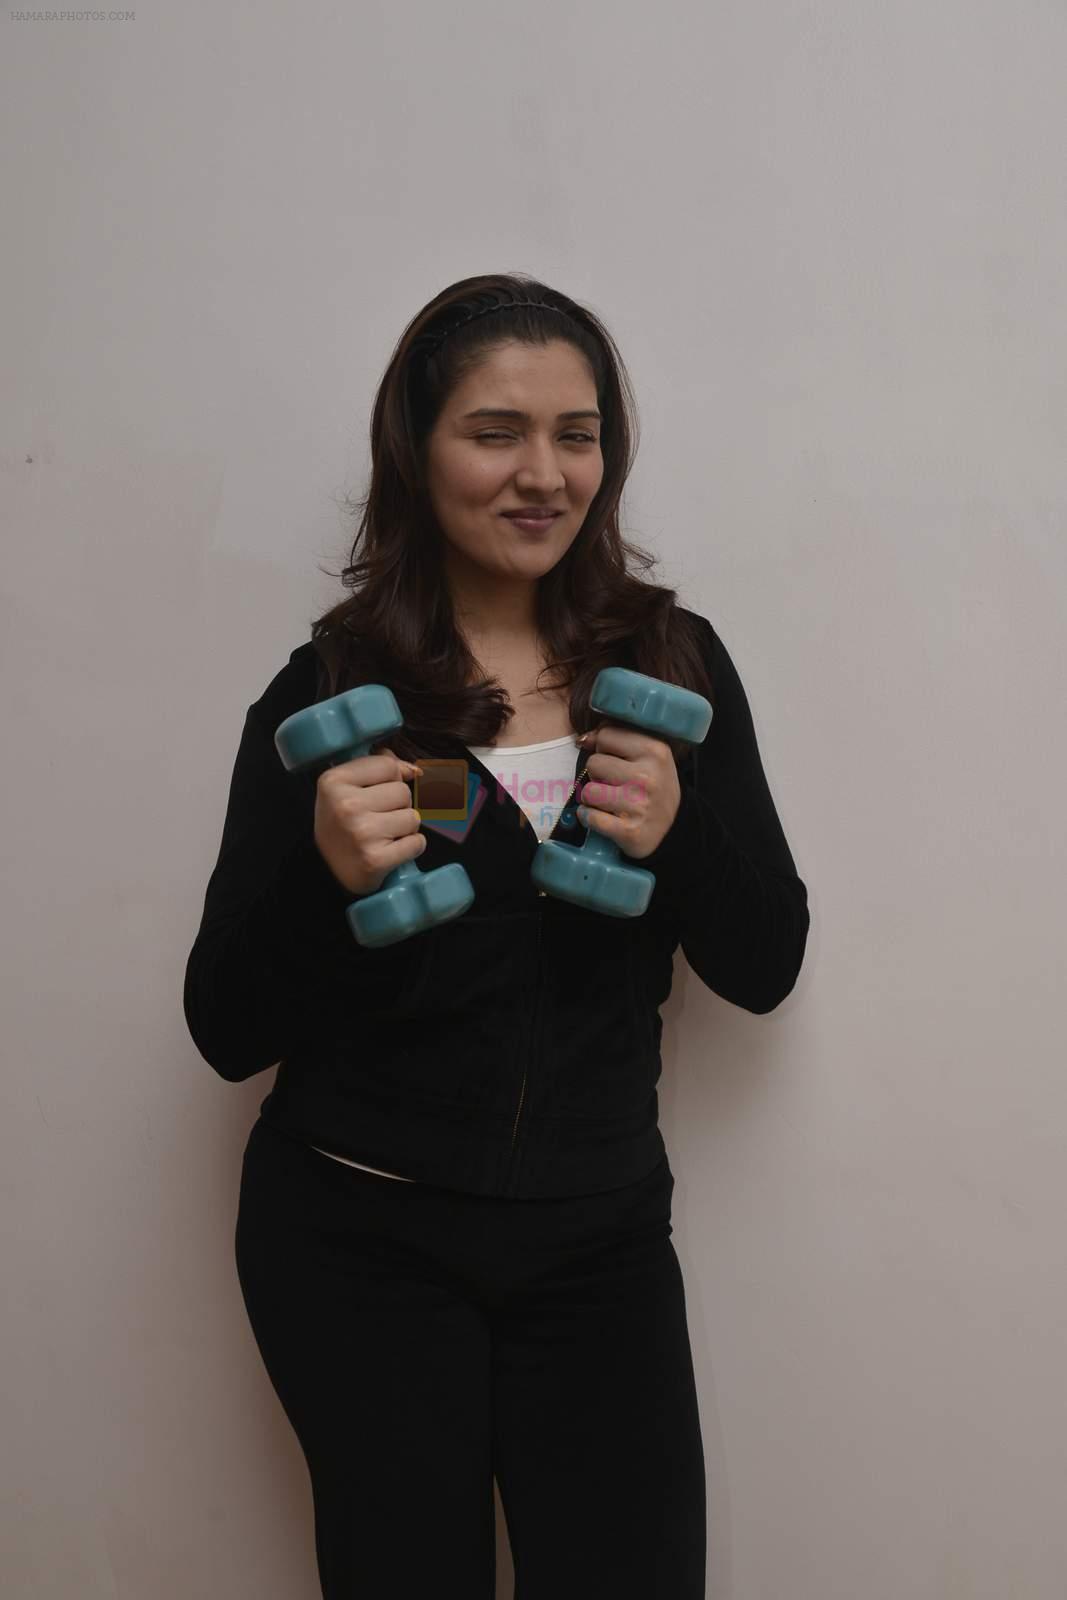 Tina Ahuja snapped at an tv interview on fitness on 23rd Nov 2015